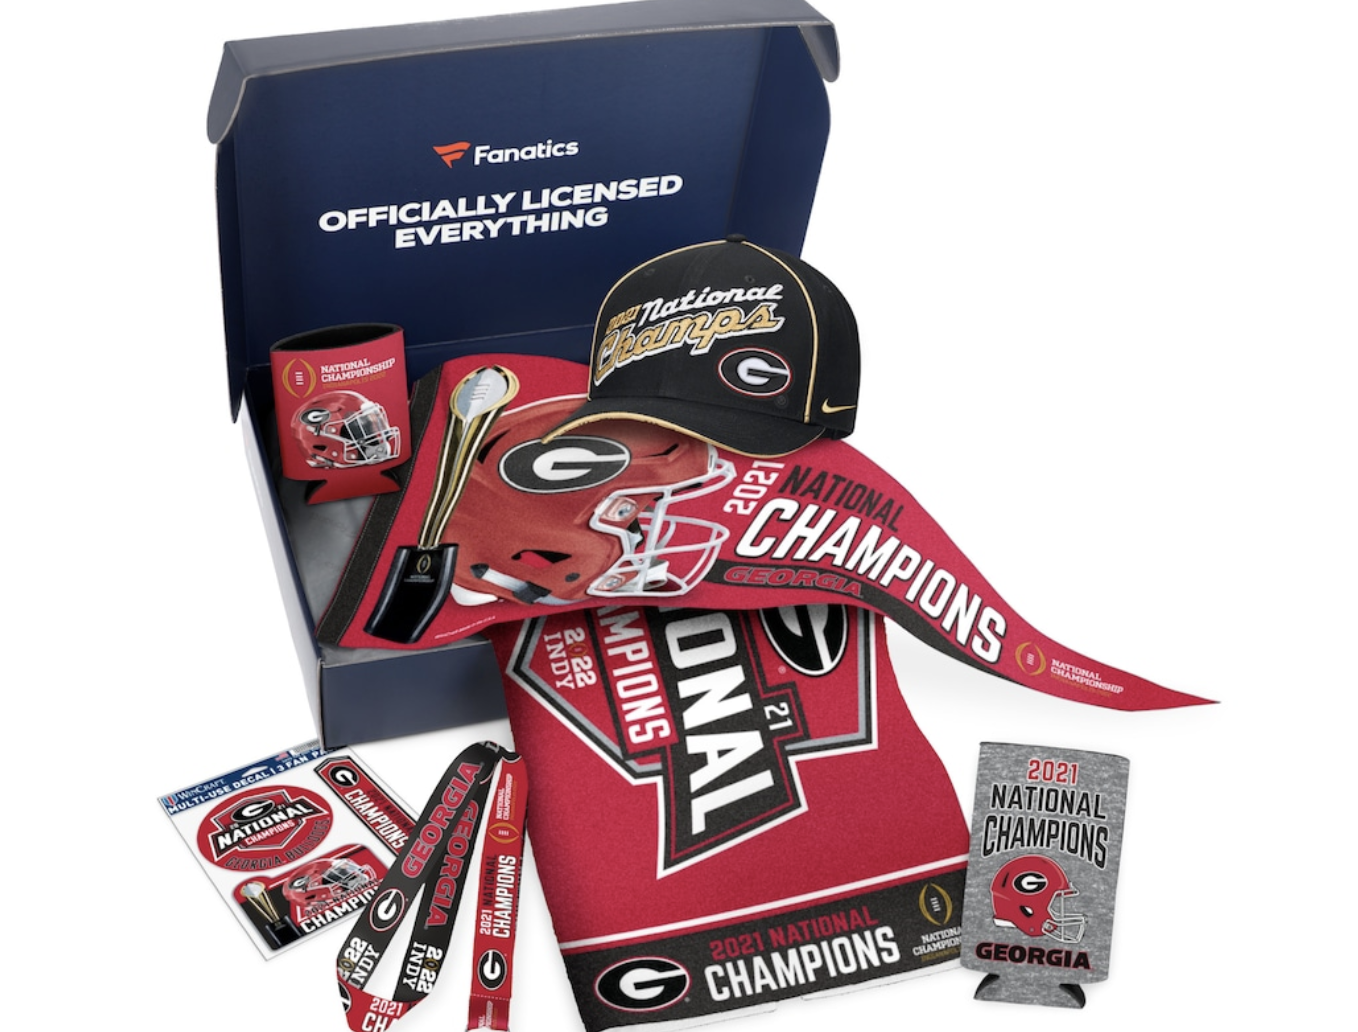 UGA Football national championship gear and apparel now on sale